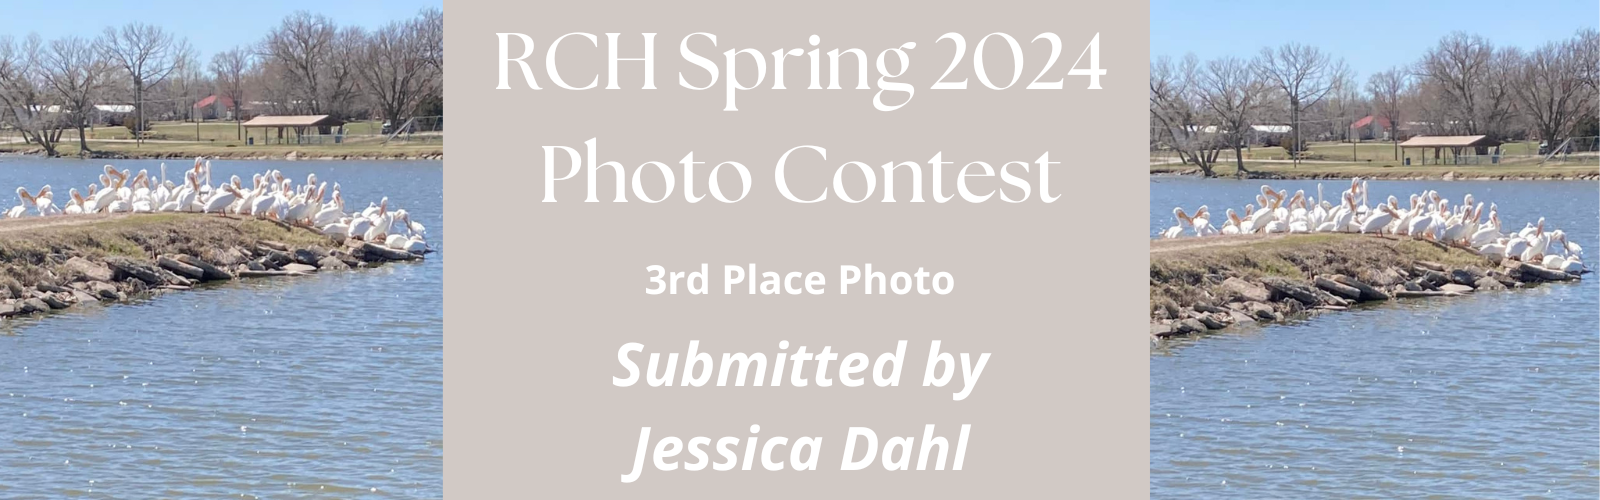 Spring Photo Contest 2024 - 3rd place